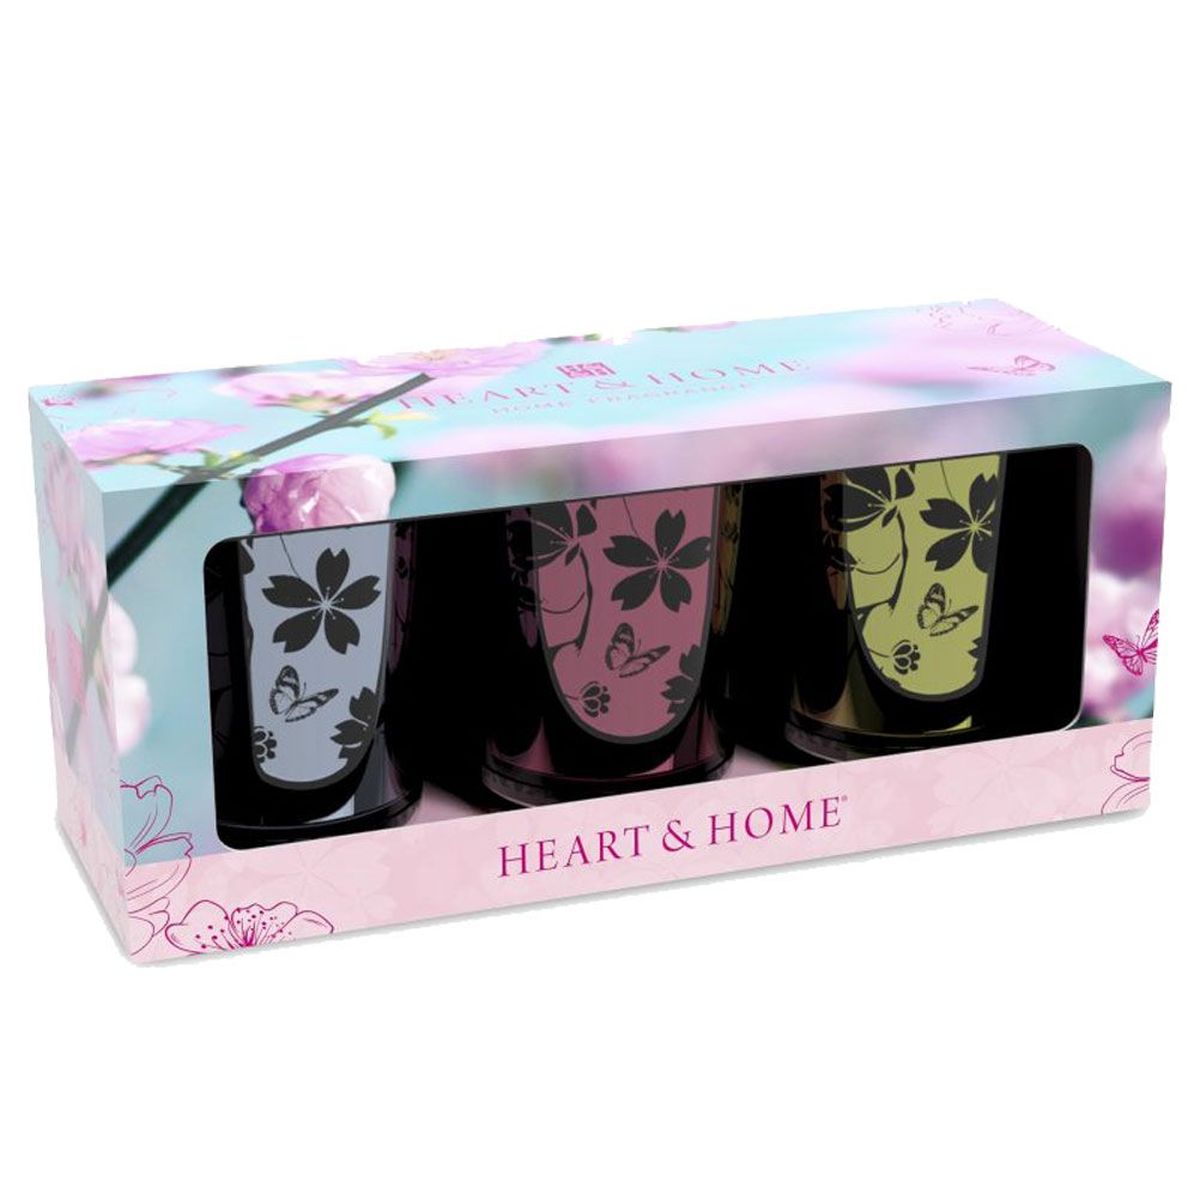 Heart and Home Gift Set - 3 votives holders